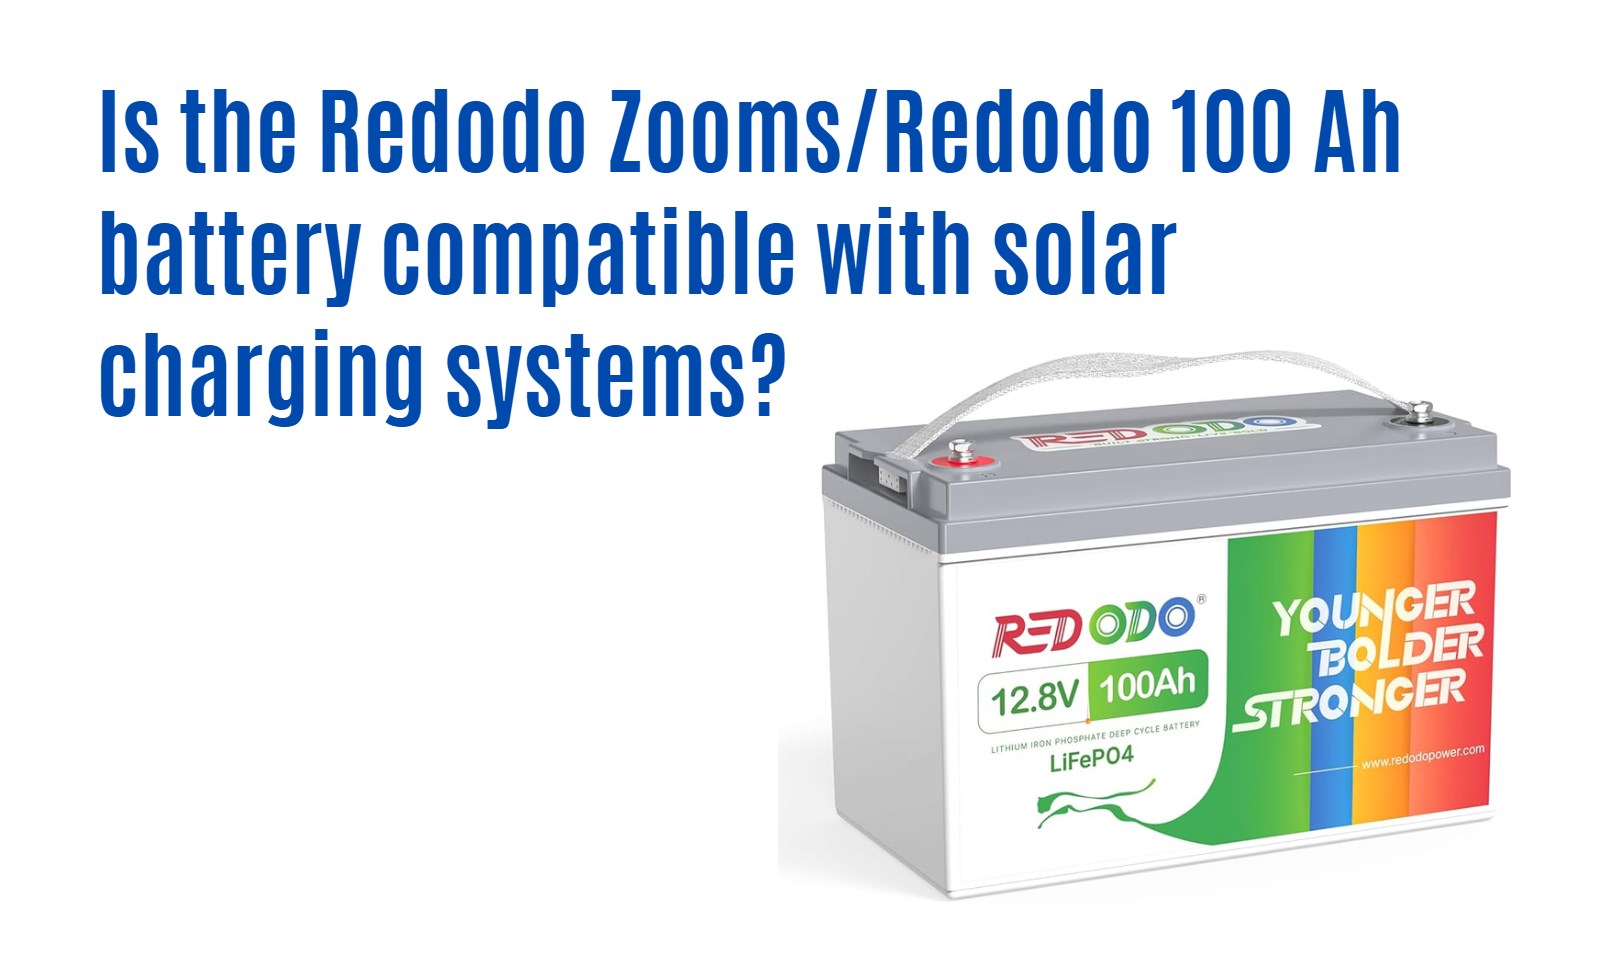 Is the Redodo Zooms/Redodo 100 Ah battery compatible with solar charging systems? 12v 100ah 12.8v 100ah group24